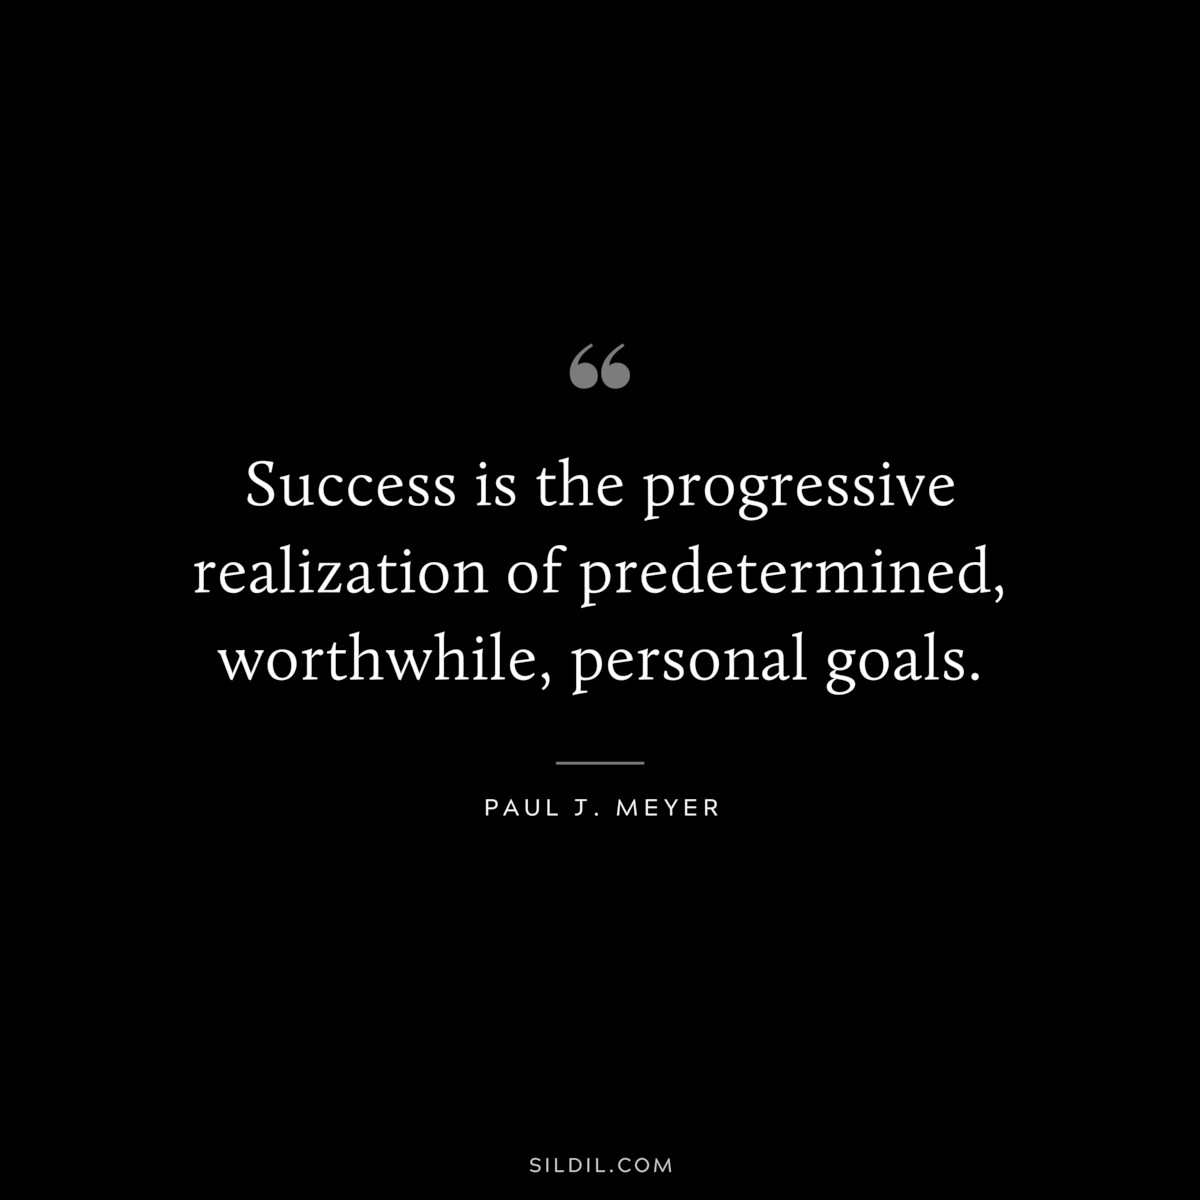 Success is the progressive realization of predetermined, worthwhile, personal goals. ― Paul J. Meyer